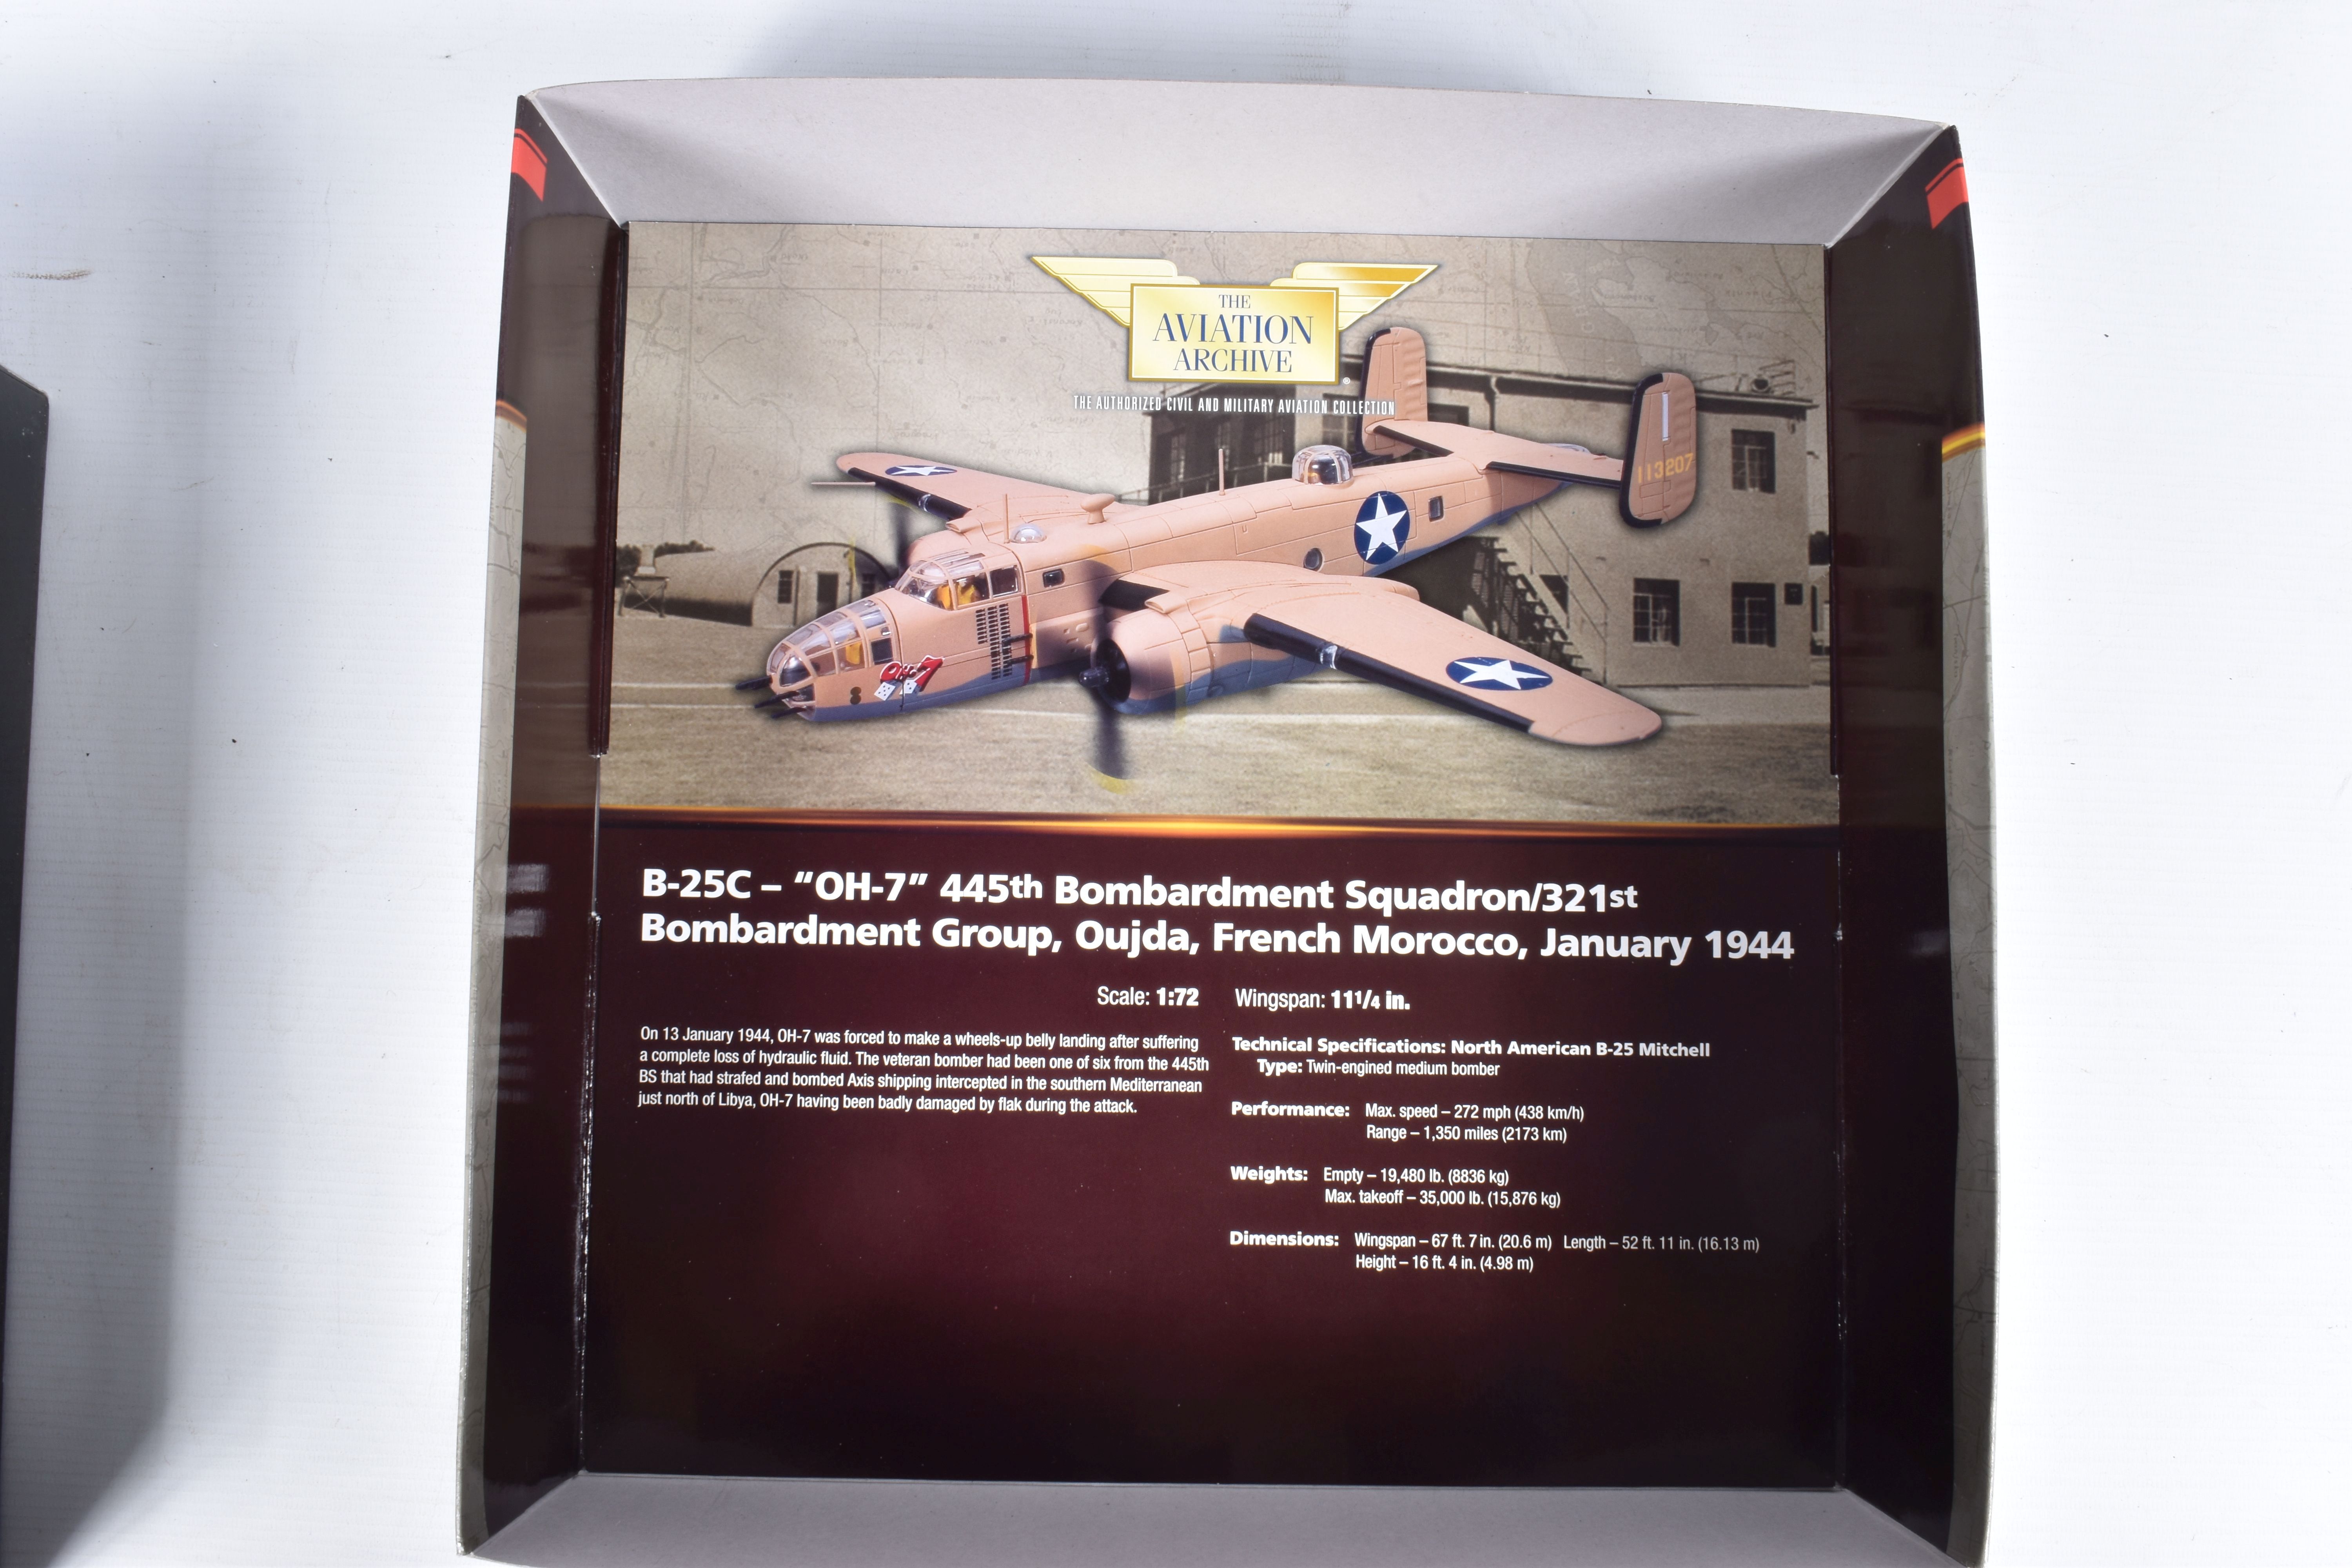 A BOXED LIMITED EDITION CORGI AVIATION ARCHIVE NOSE ART COLLECTION 1:72 SCALE B-25 C MITCHELL 'OH-7' - Image 2 of 3